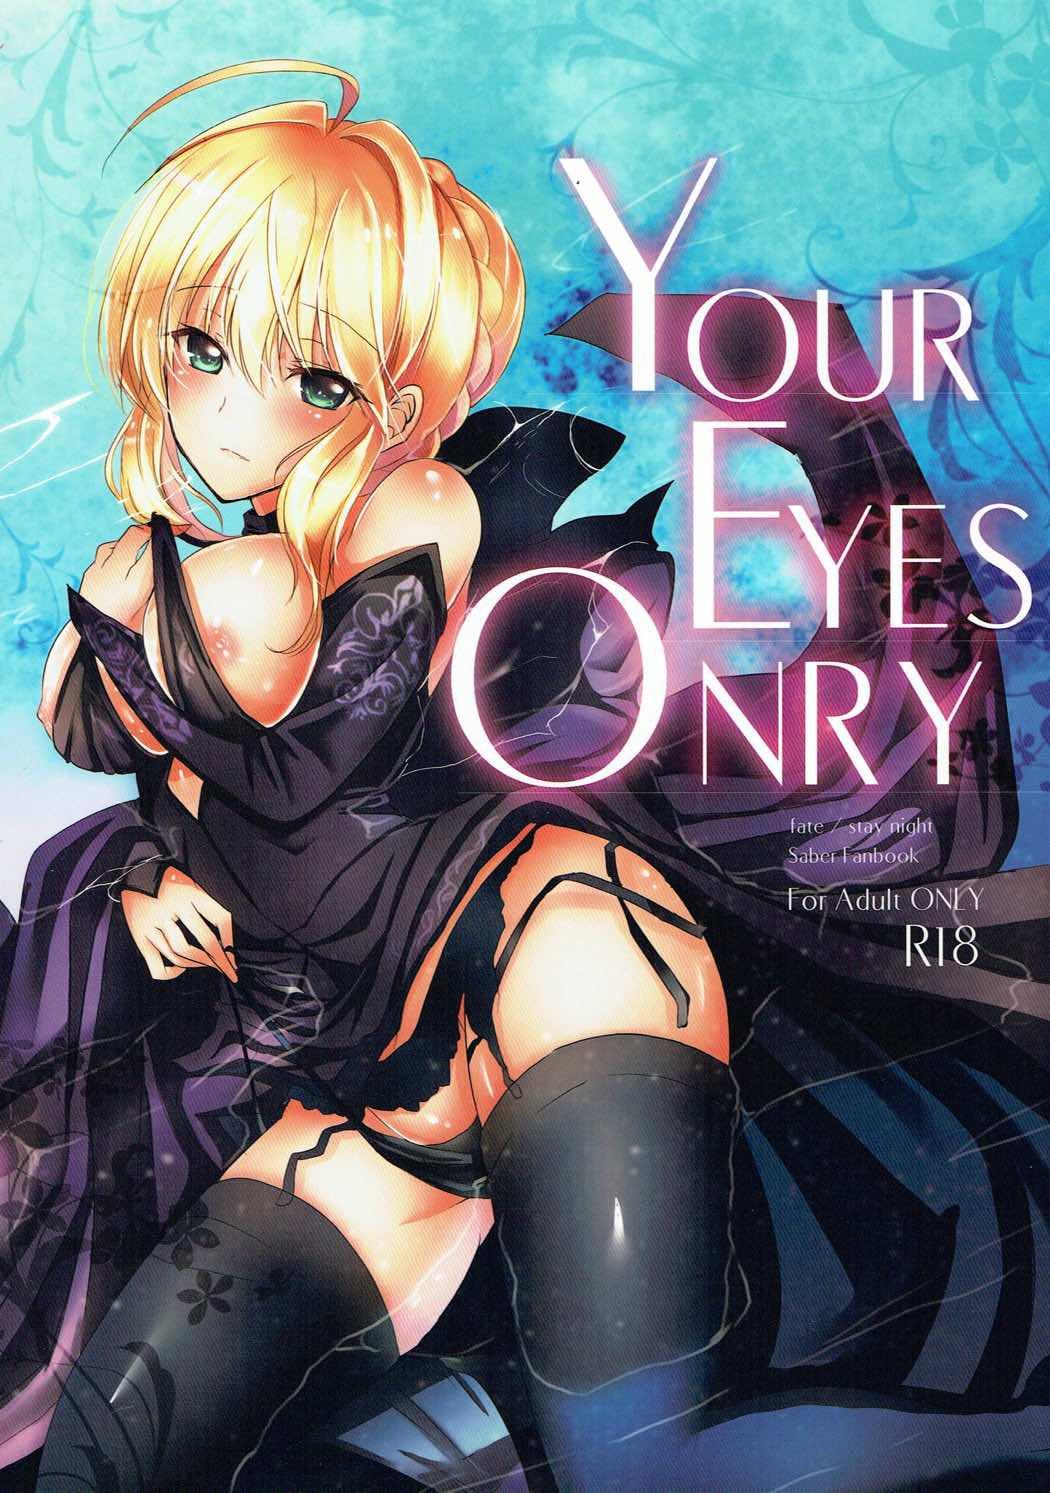 Public YOUR EYES ONRY - Fate stay night Prima - Picture 1